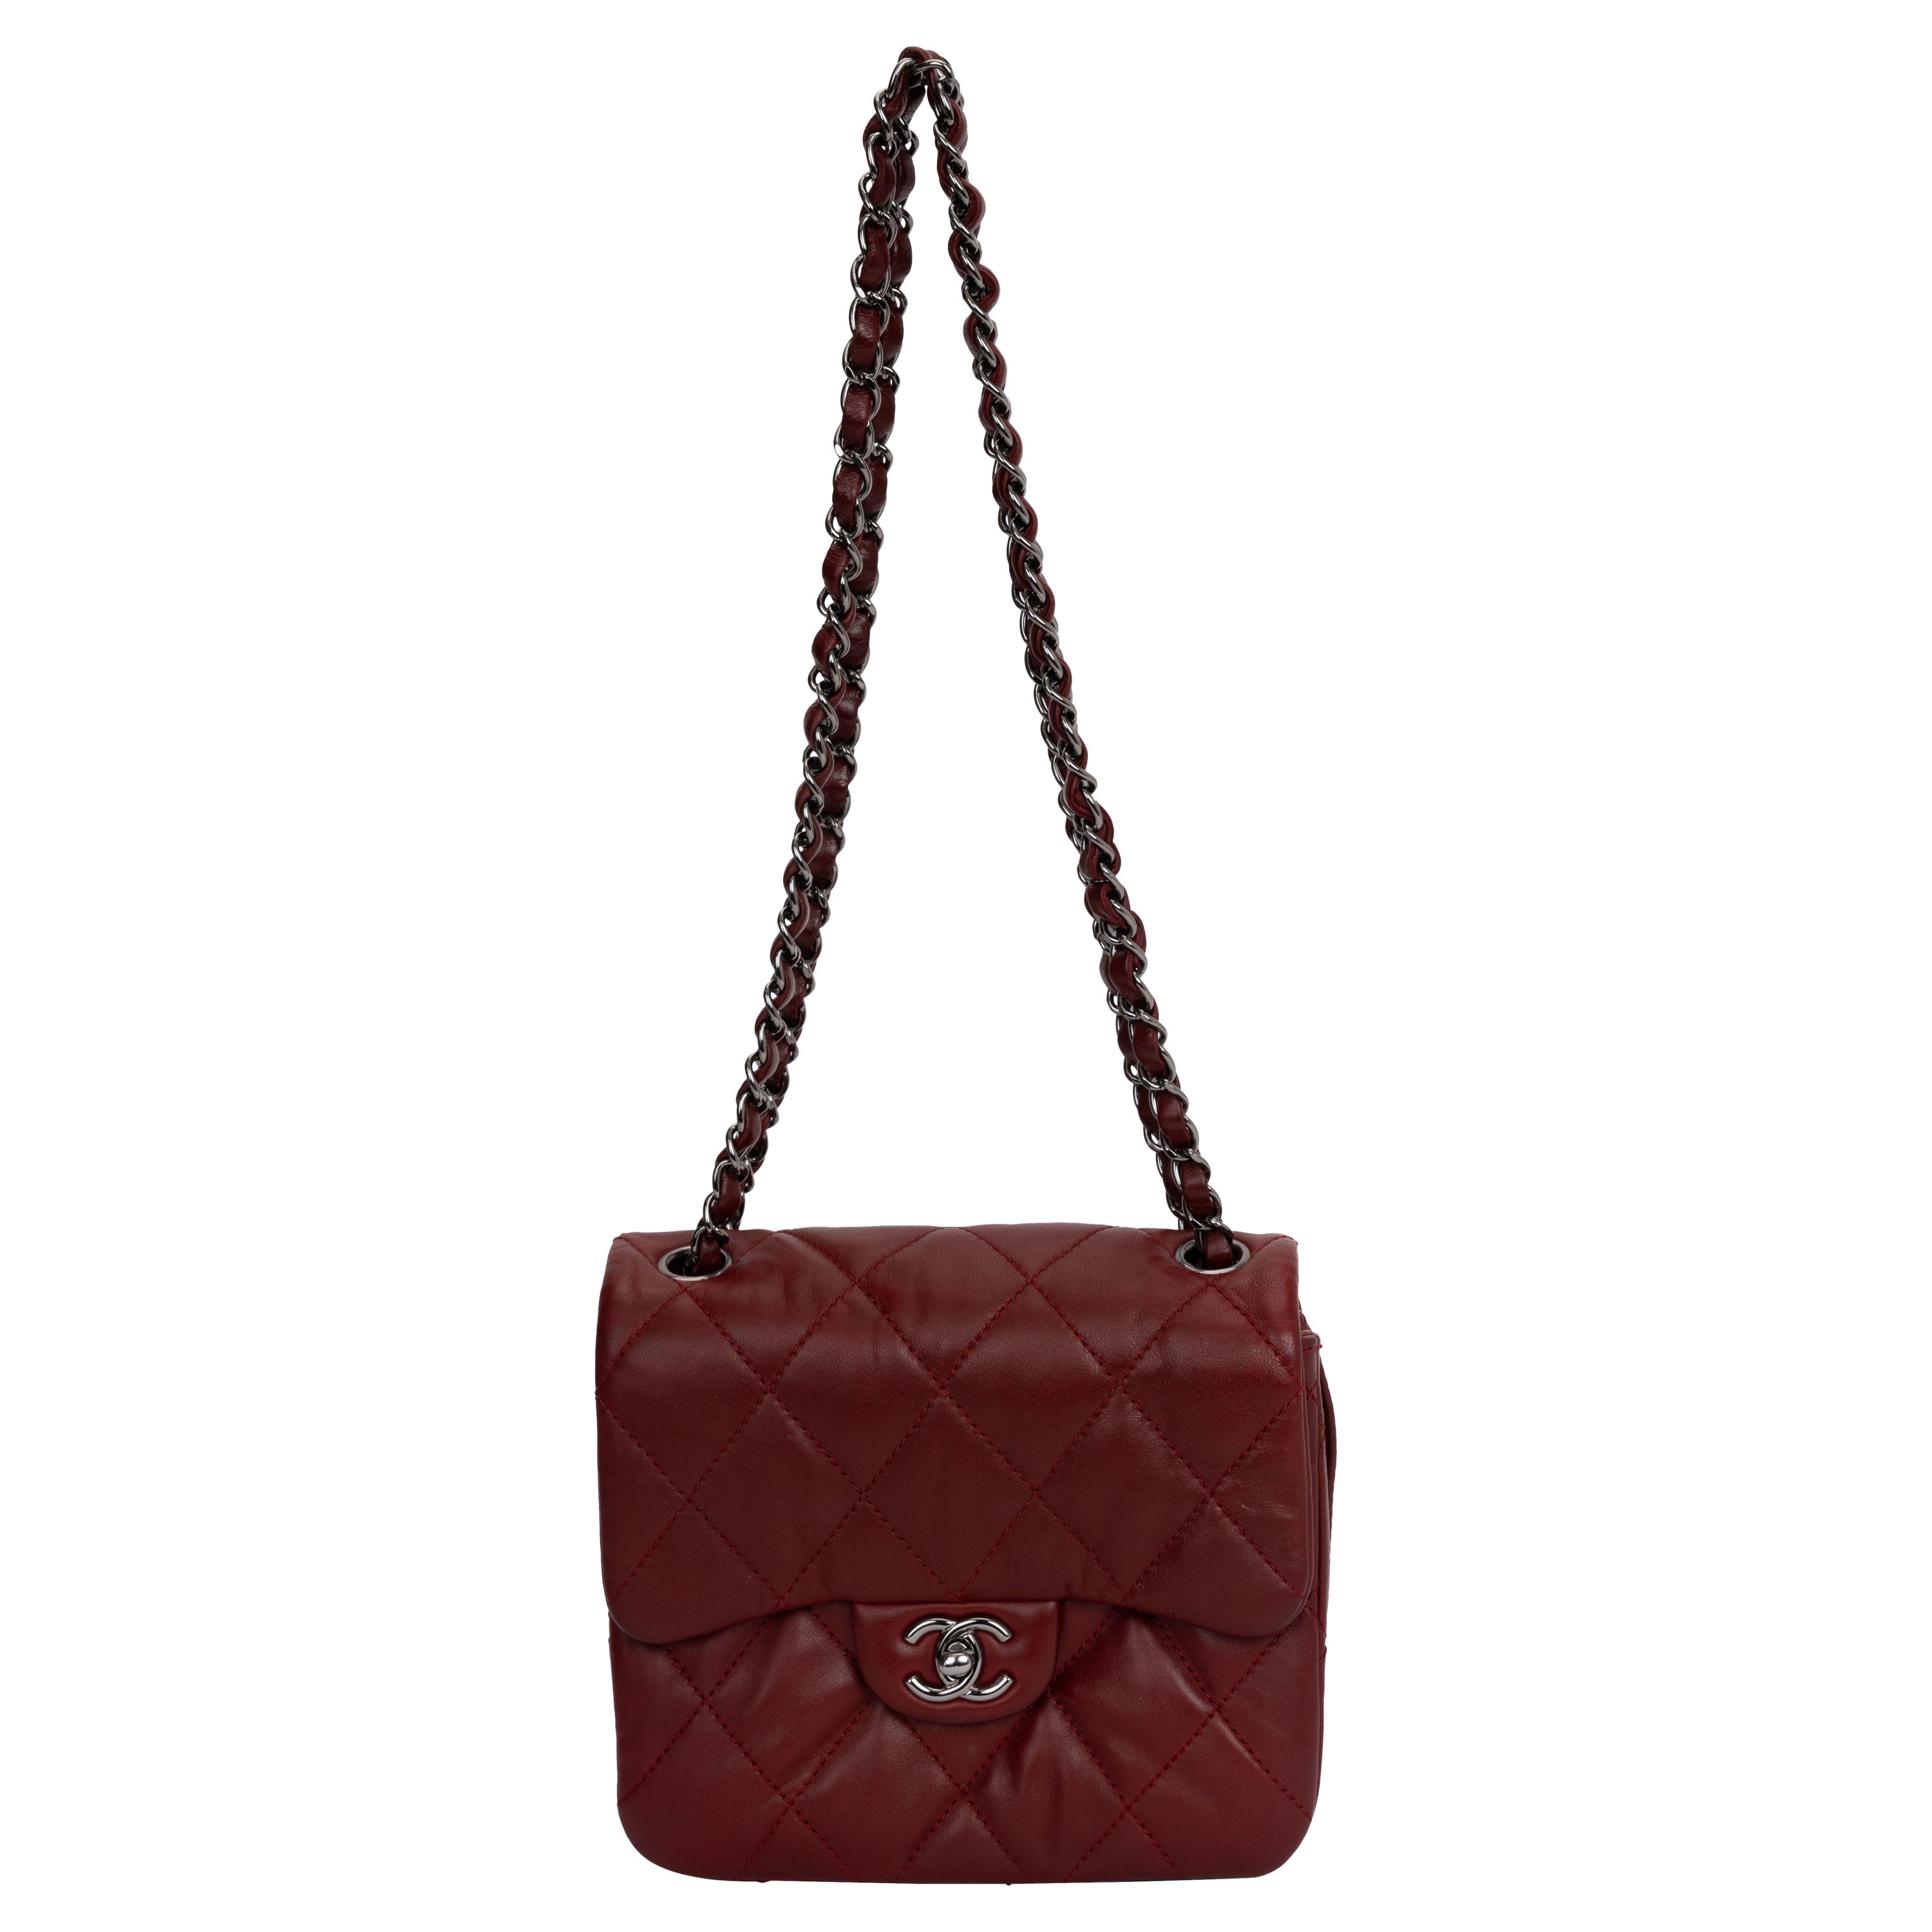 Chanel Burgundy Quilted Flap Bag For Sale